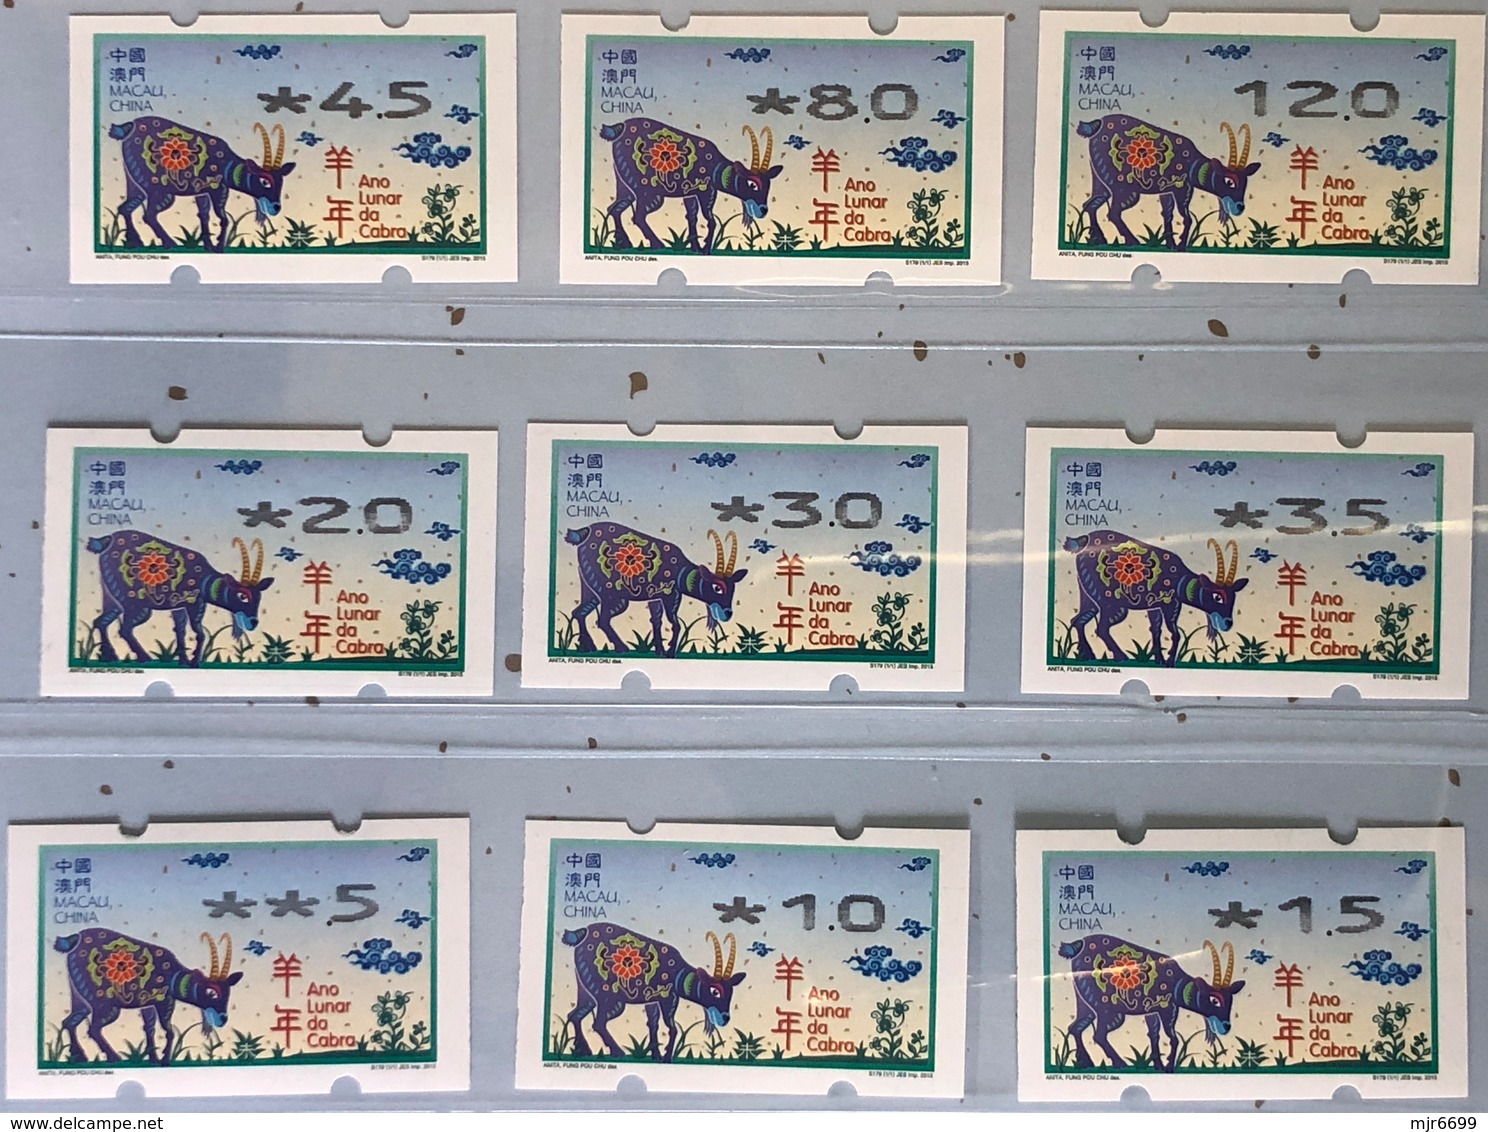 MACAU ATM LABELS, ZODIAC NEW YEAR OF THE GOAT ISSUE COMPLETE SET NAGLER 104 ALL FINE UM MINT - Distributeurs